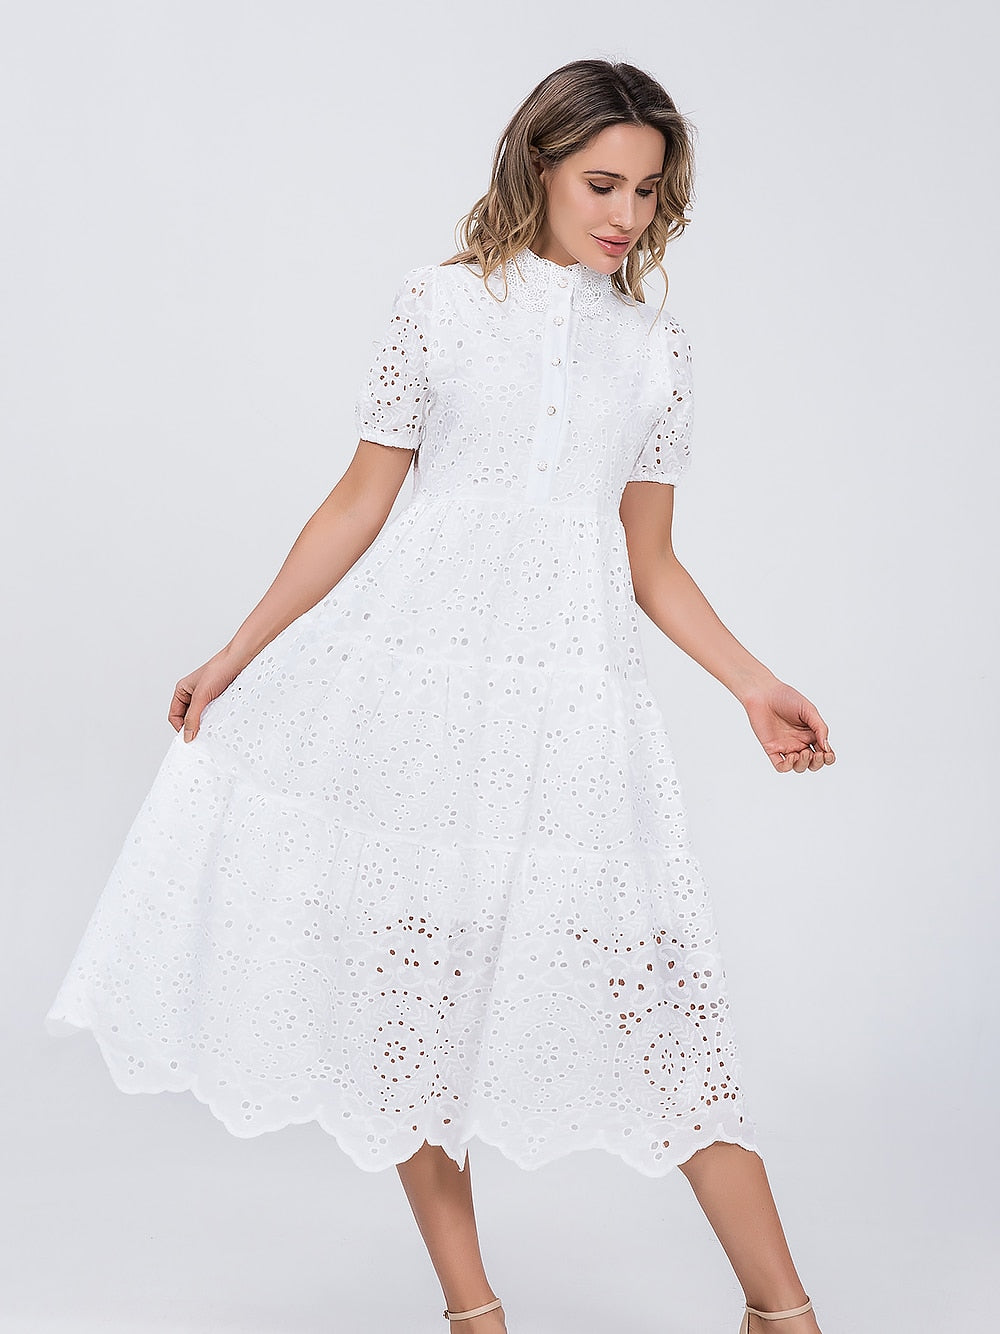 Marwin Cotton Hollow Out Summer White dress Women Holiday Perppy Casual High Waist Ruffled Mini dresses A-line frills vestido